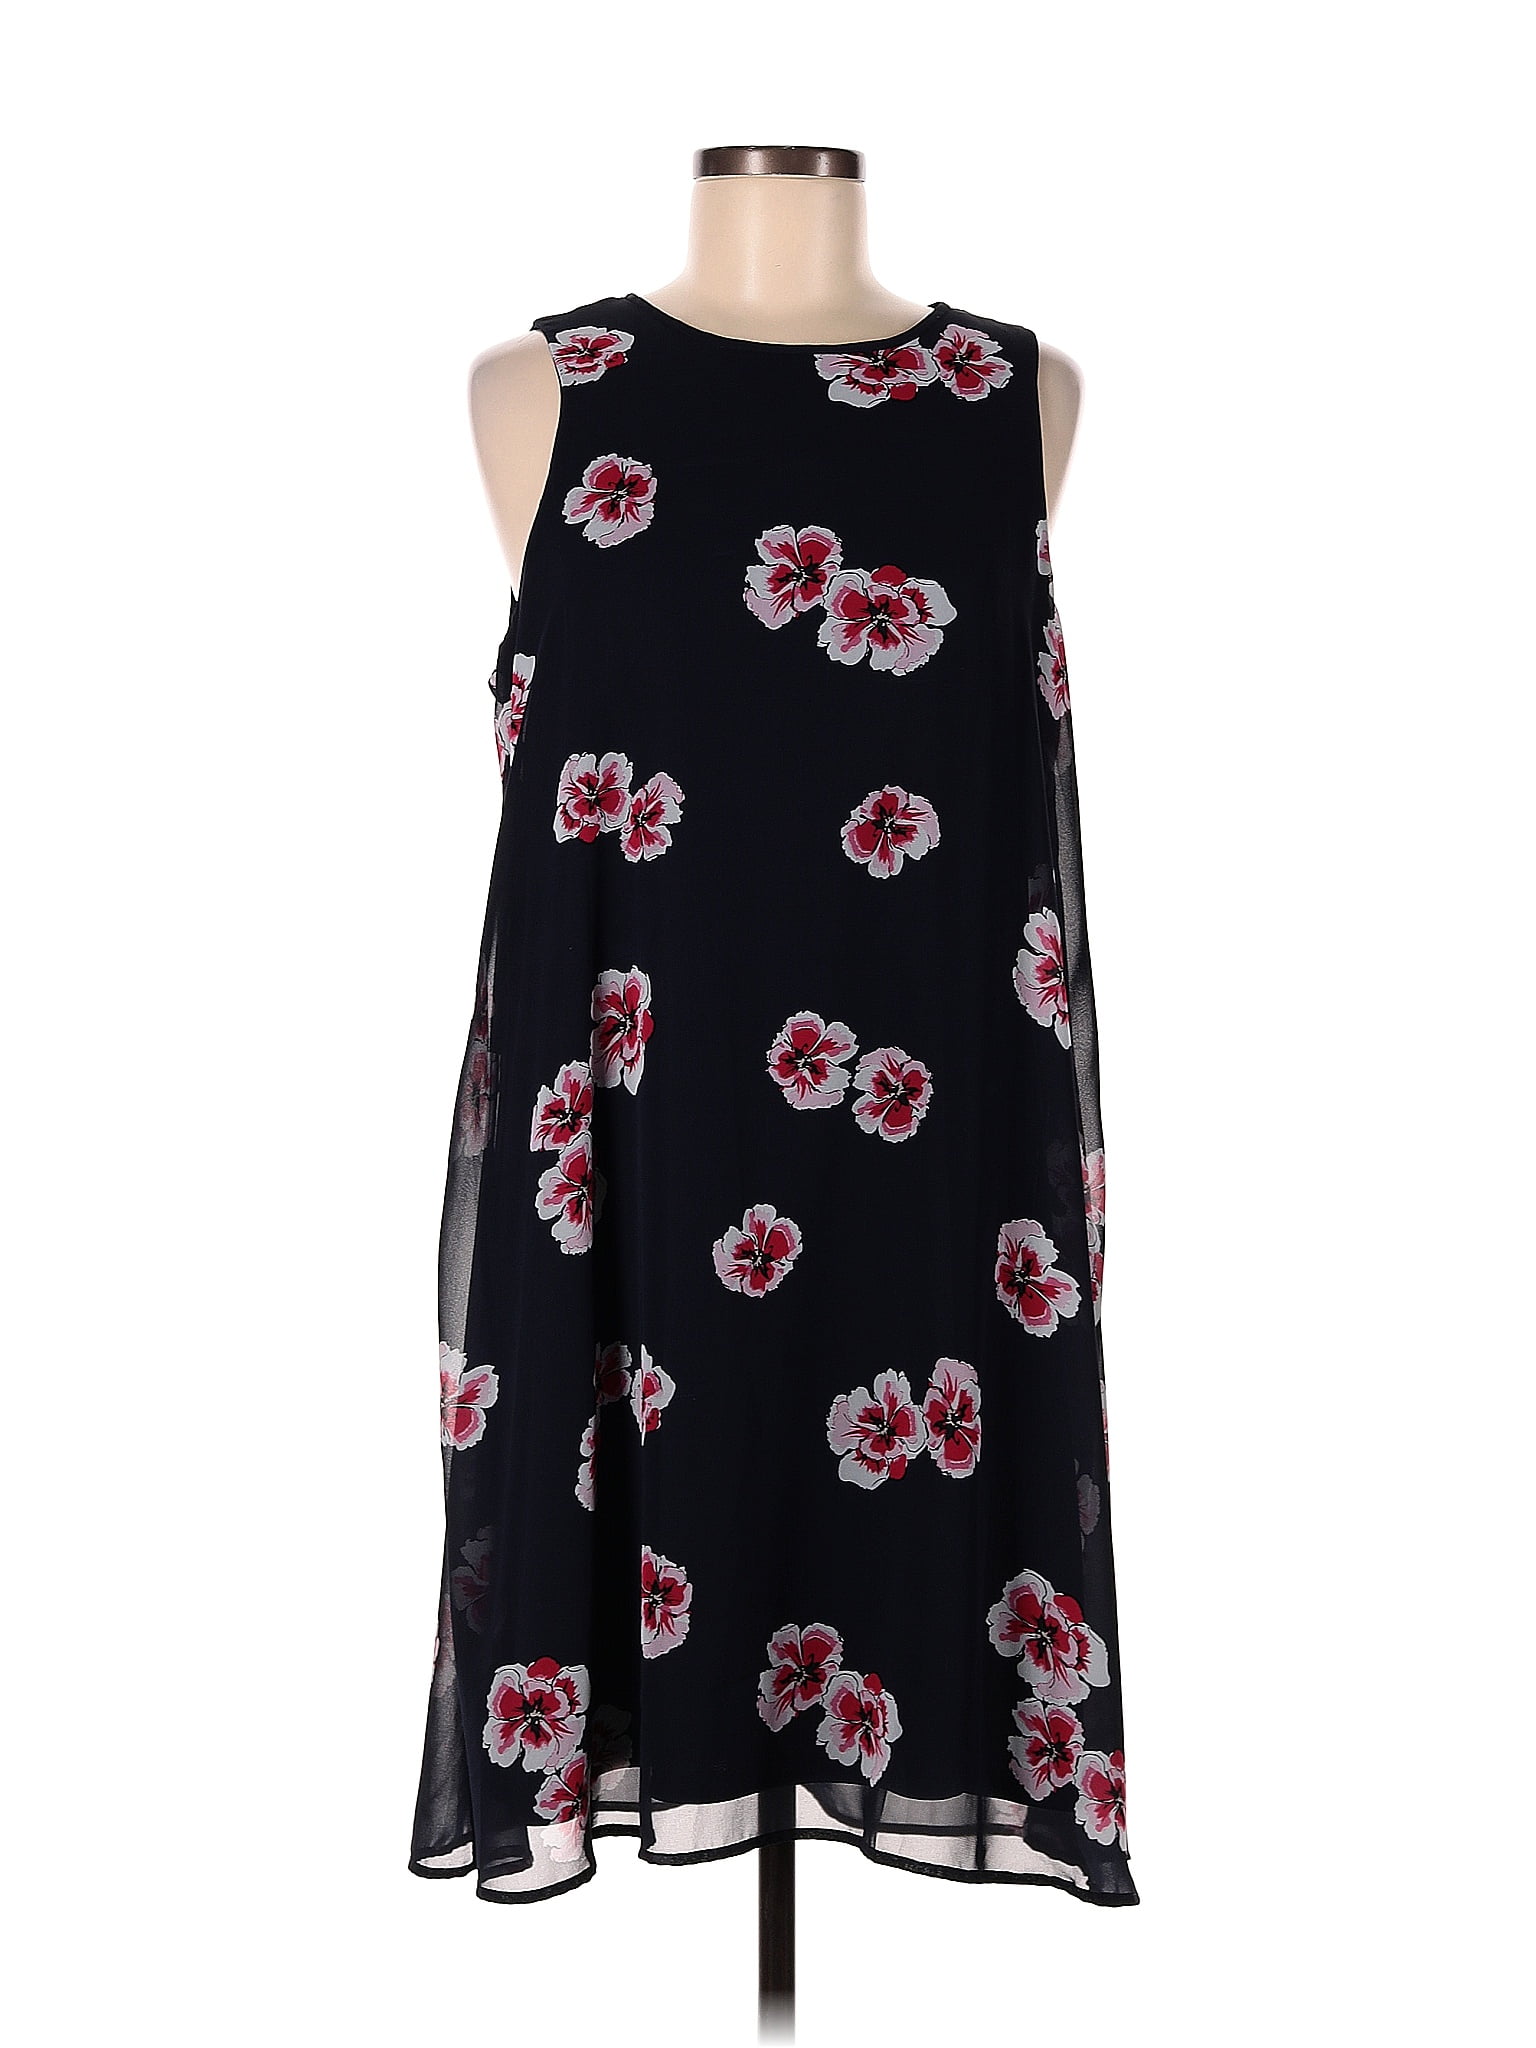 Tommy Hilfiger 100% Polyester Floral Black Casual Dress Size 12 - 76% off